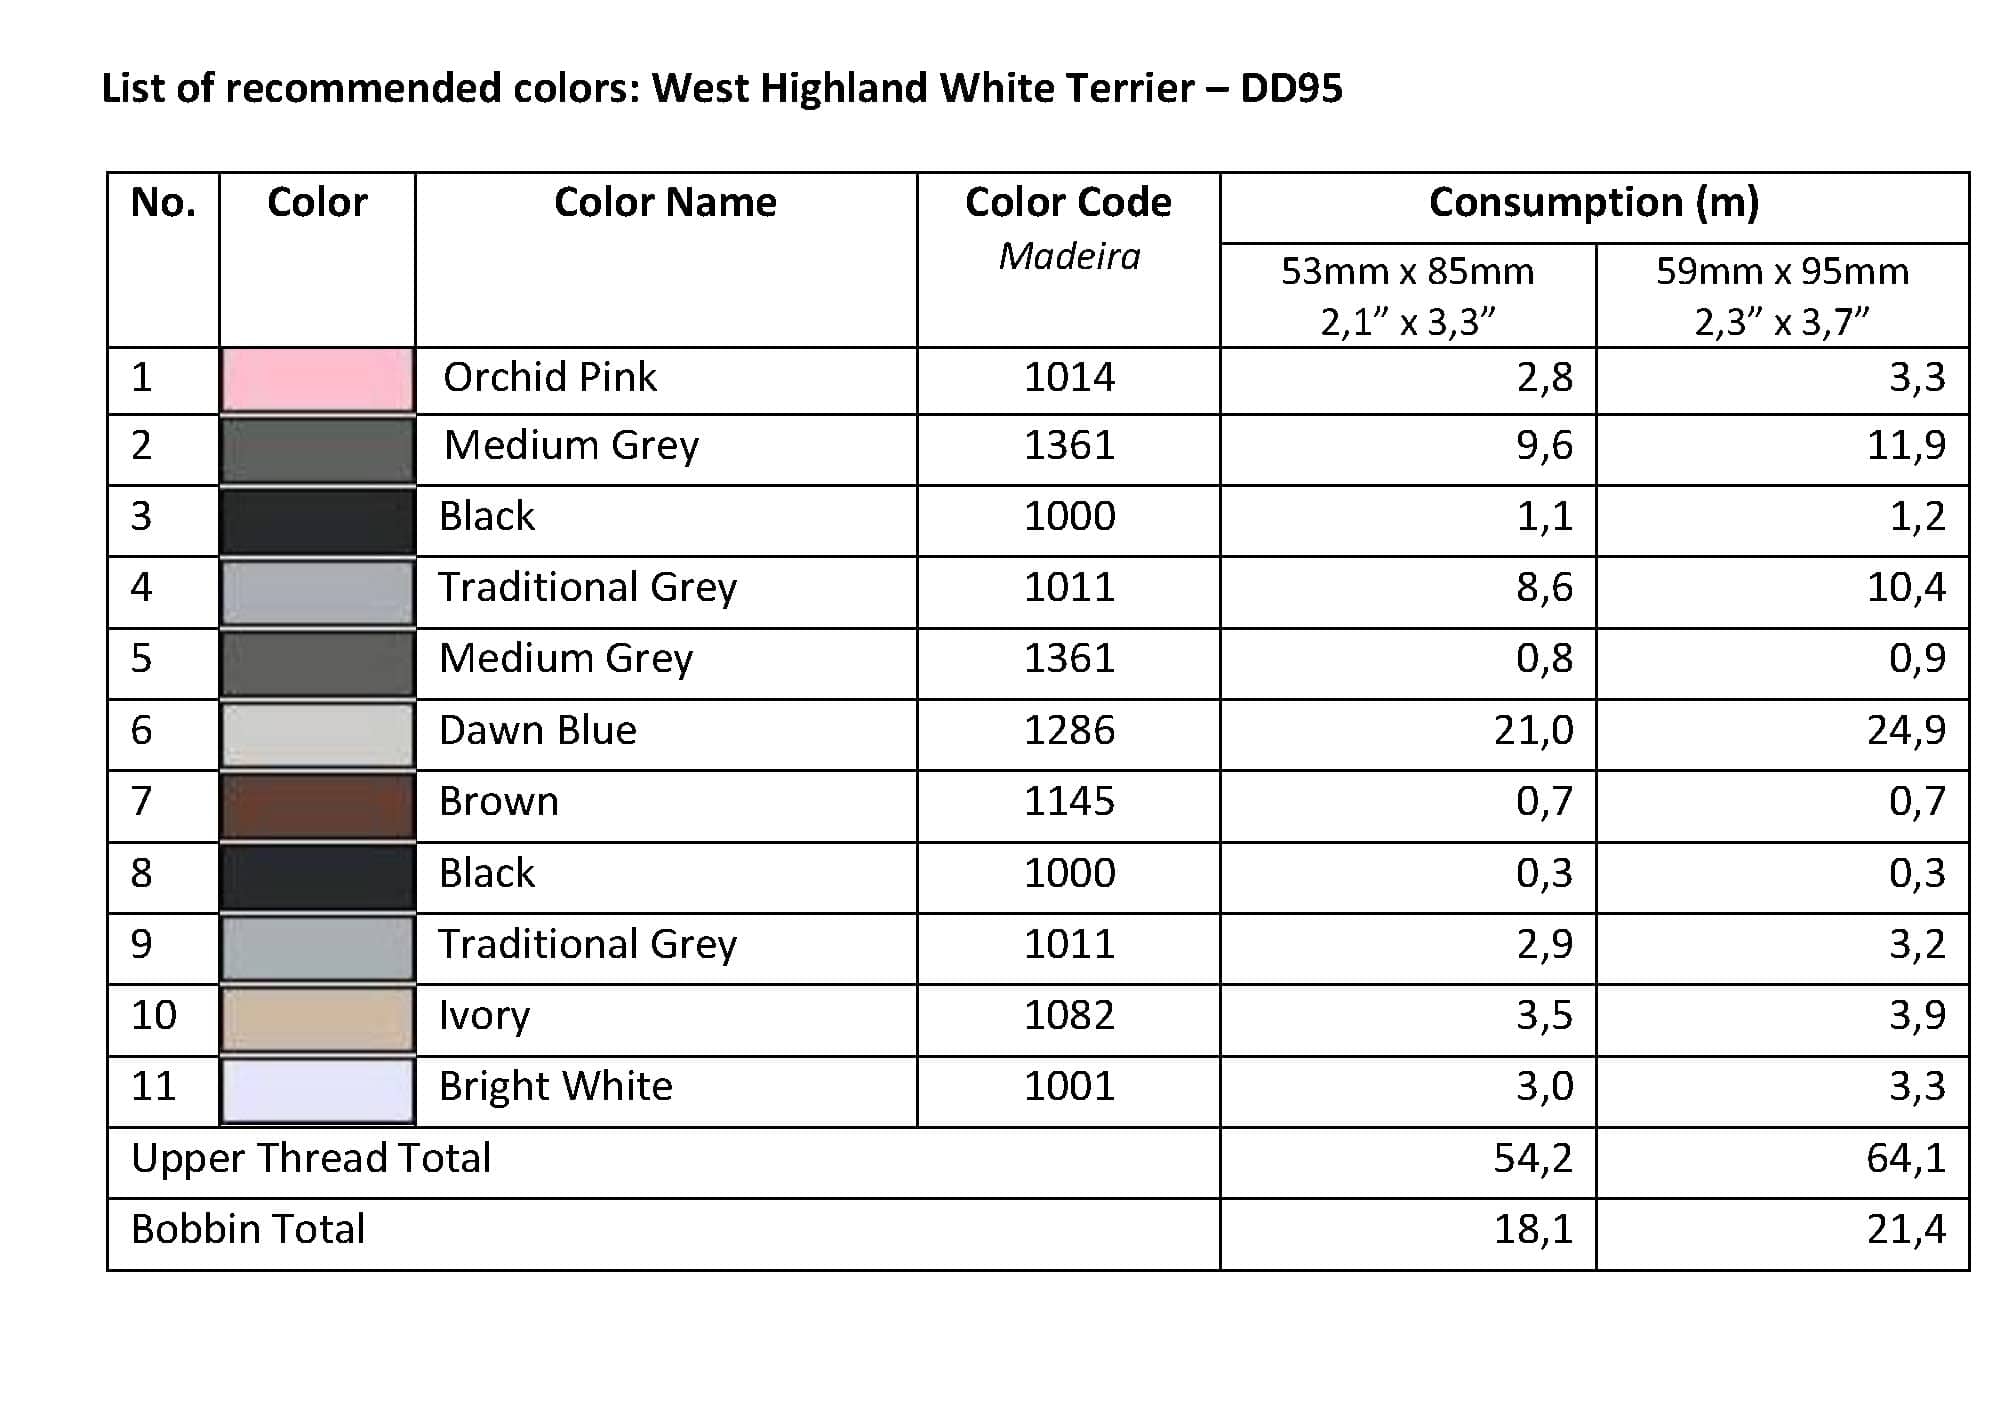 List of Recommended Colors -  West Highland White Terrier DD95